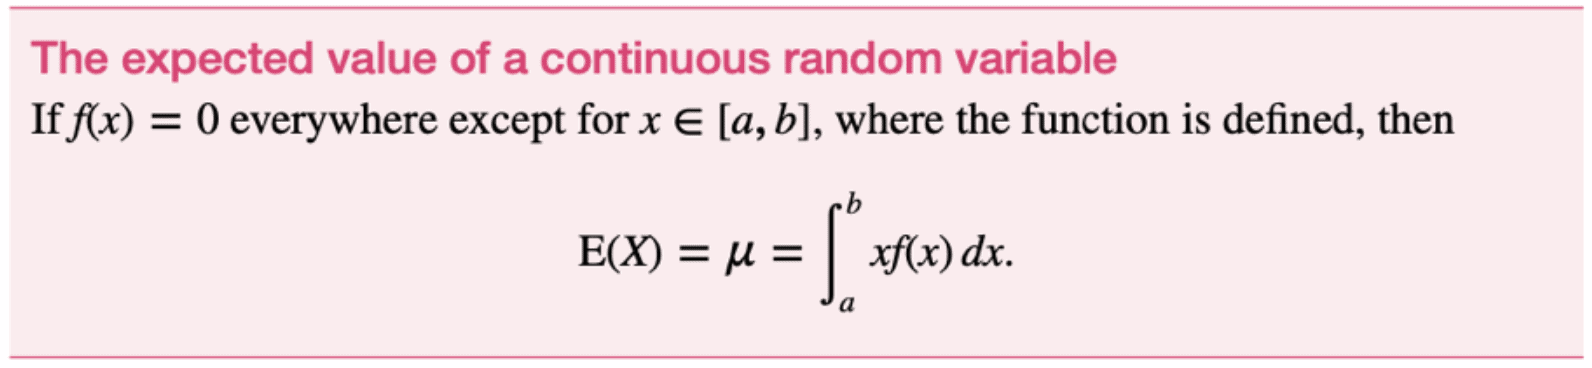 The expected value of a continuous random variable